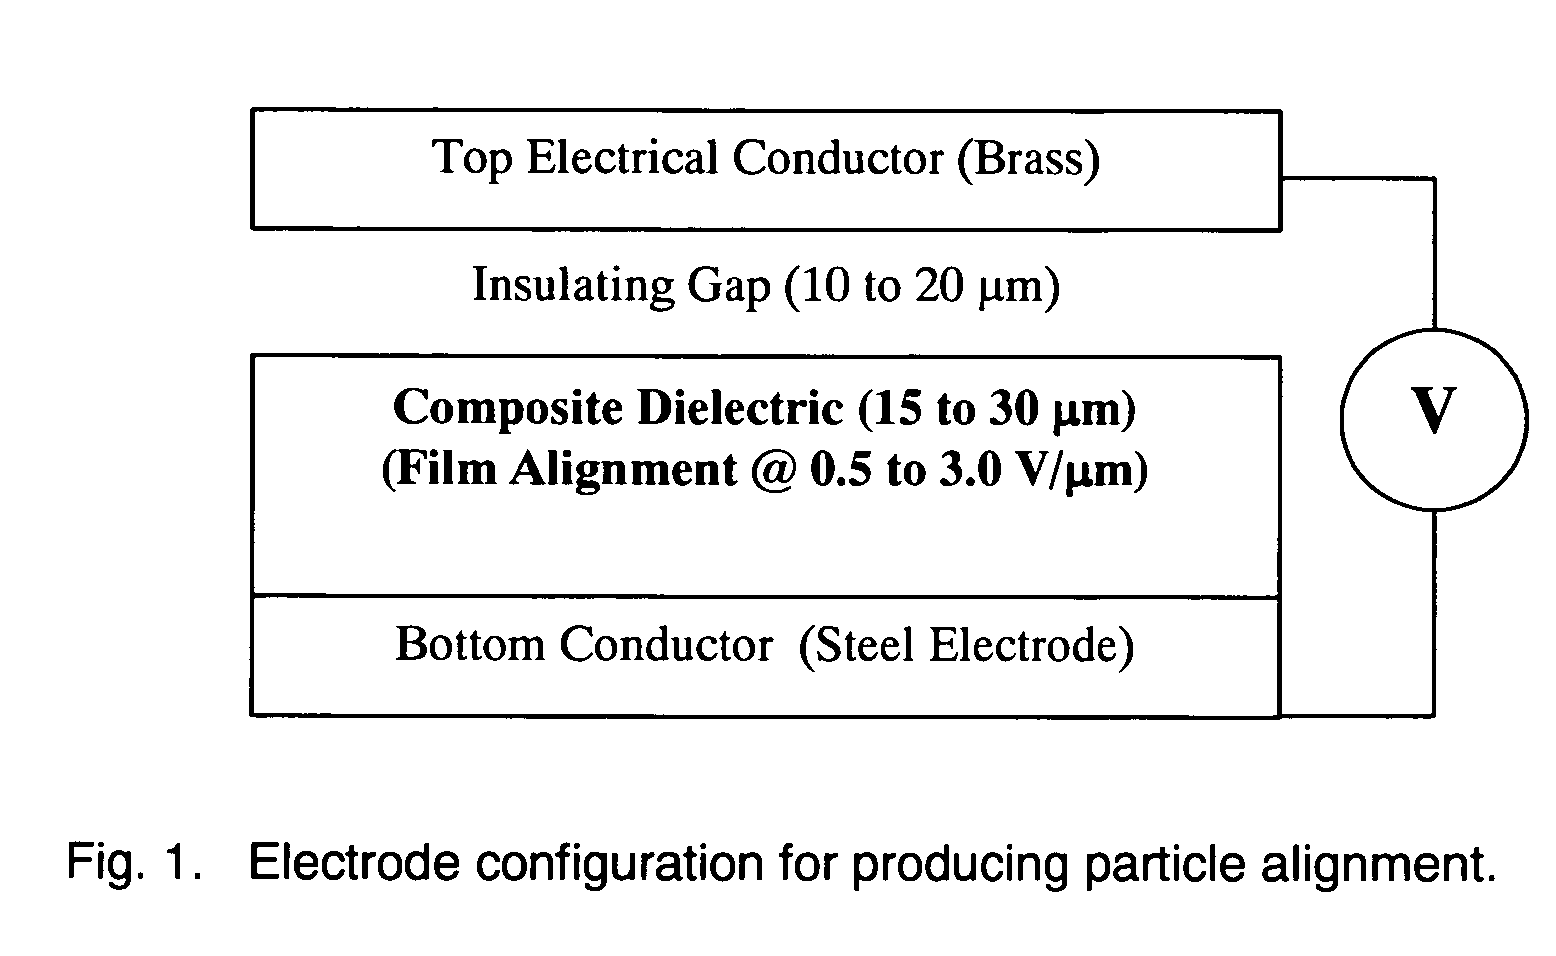 Structured composite dielectrics